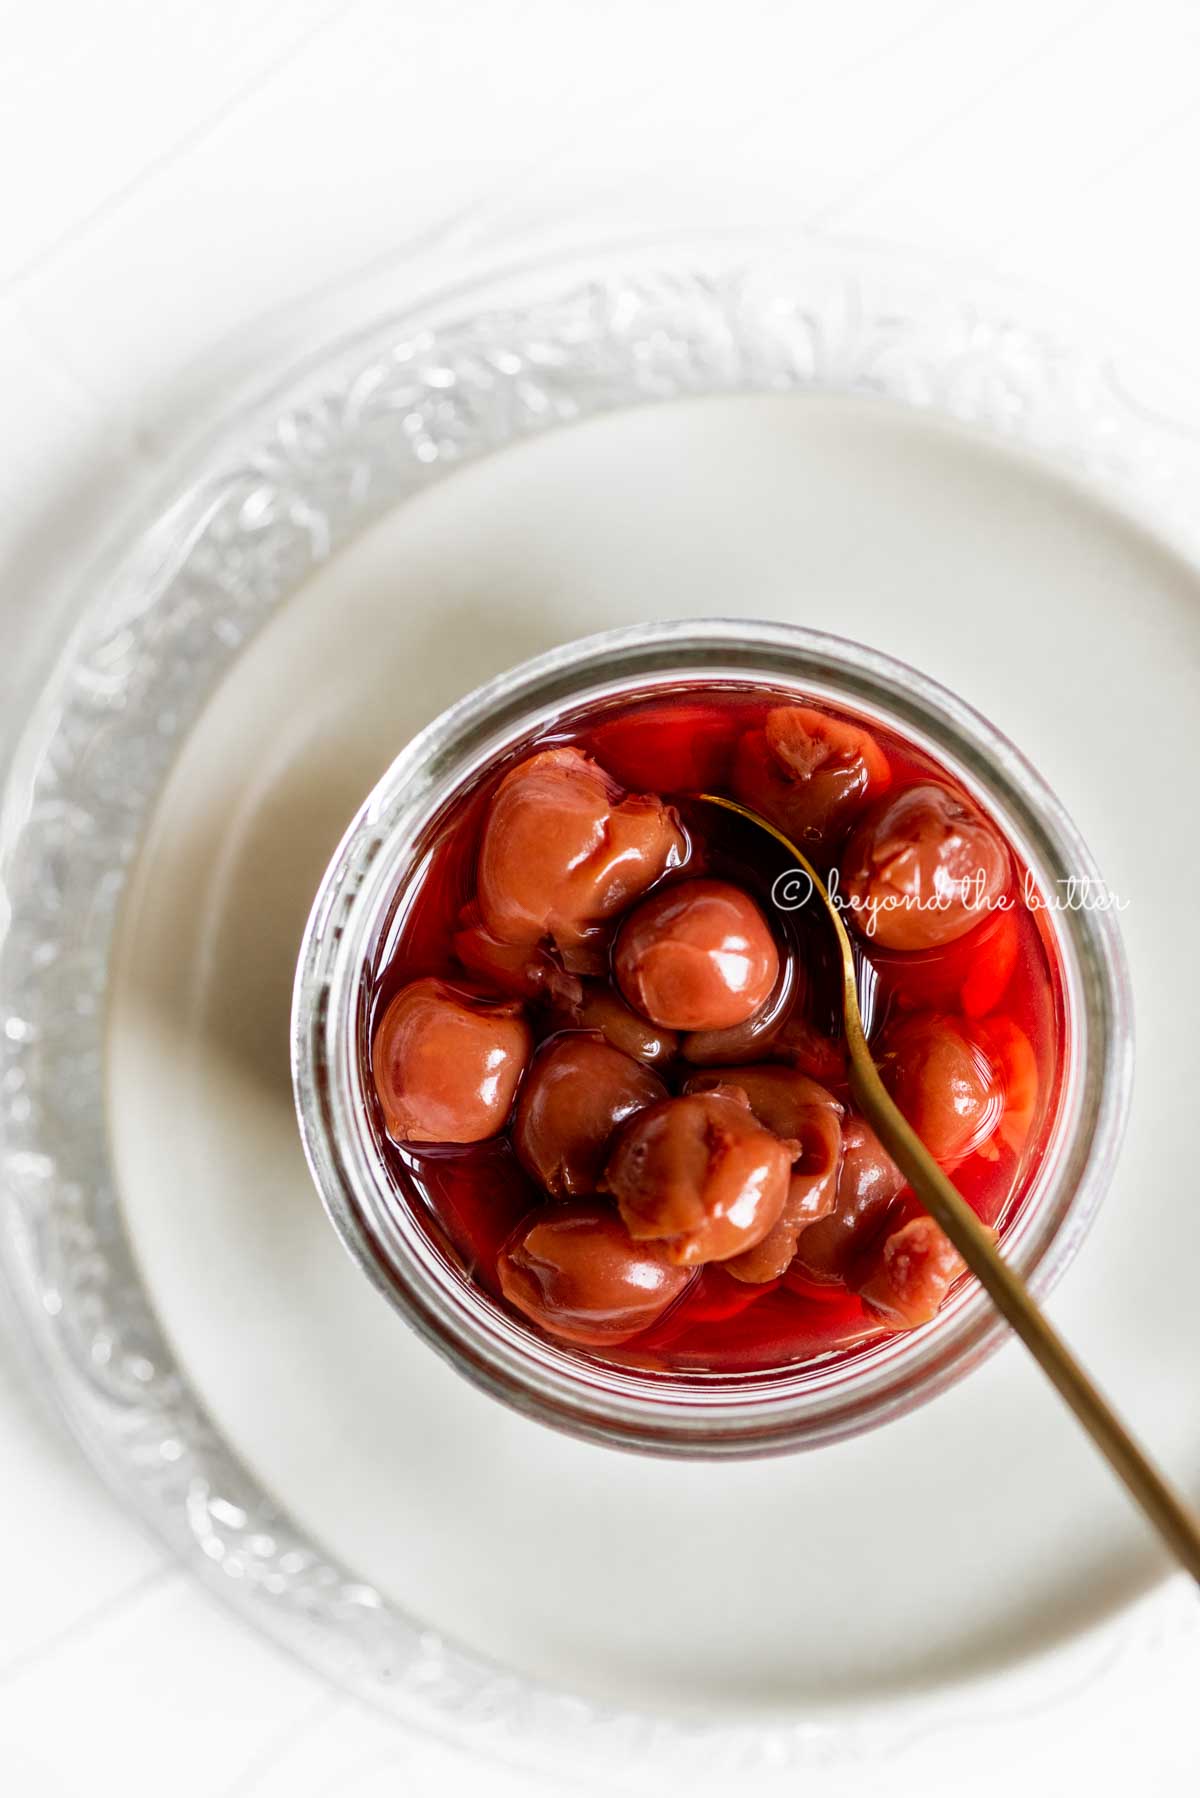 Small glass jar of cherries with a spoon on top of 2 plates | All Images © Beyond the Butter™